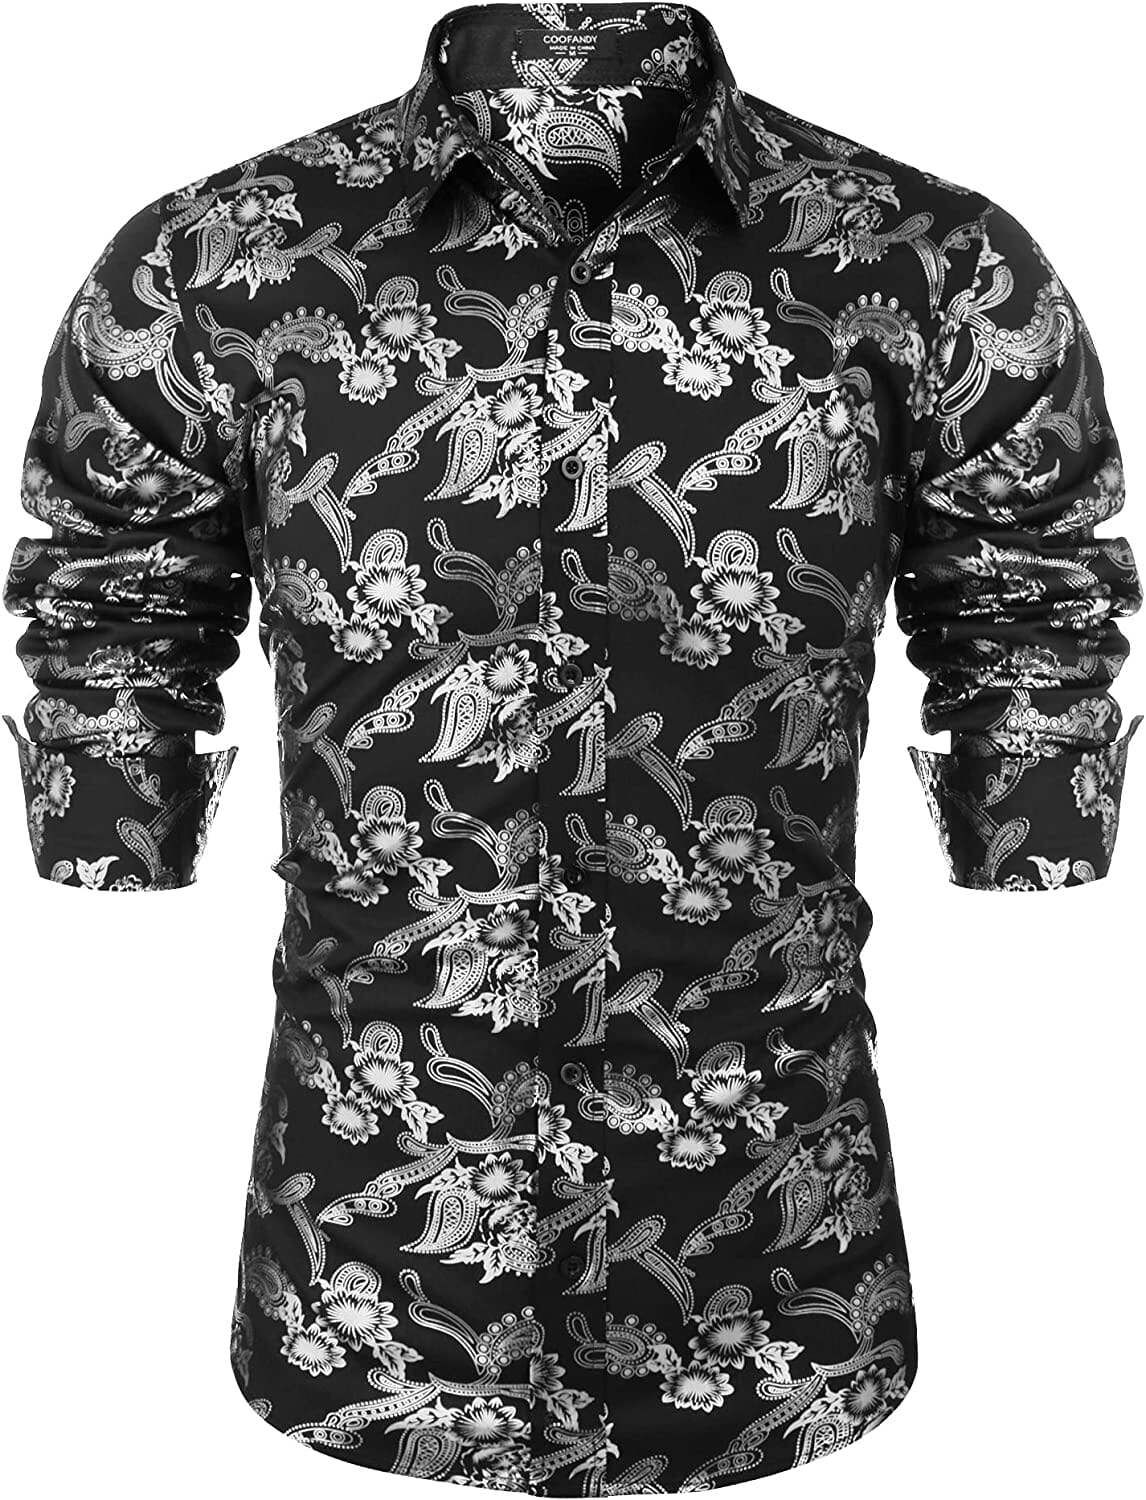 Luxury Design Floral Dress Shirt (US Only) Shirts COOFANDY Store Paisley-silver S 